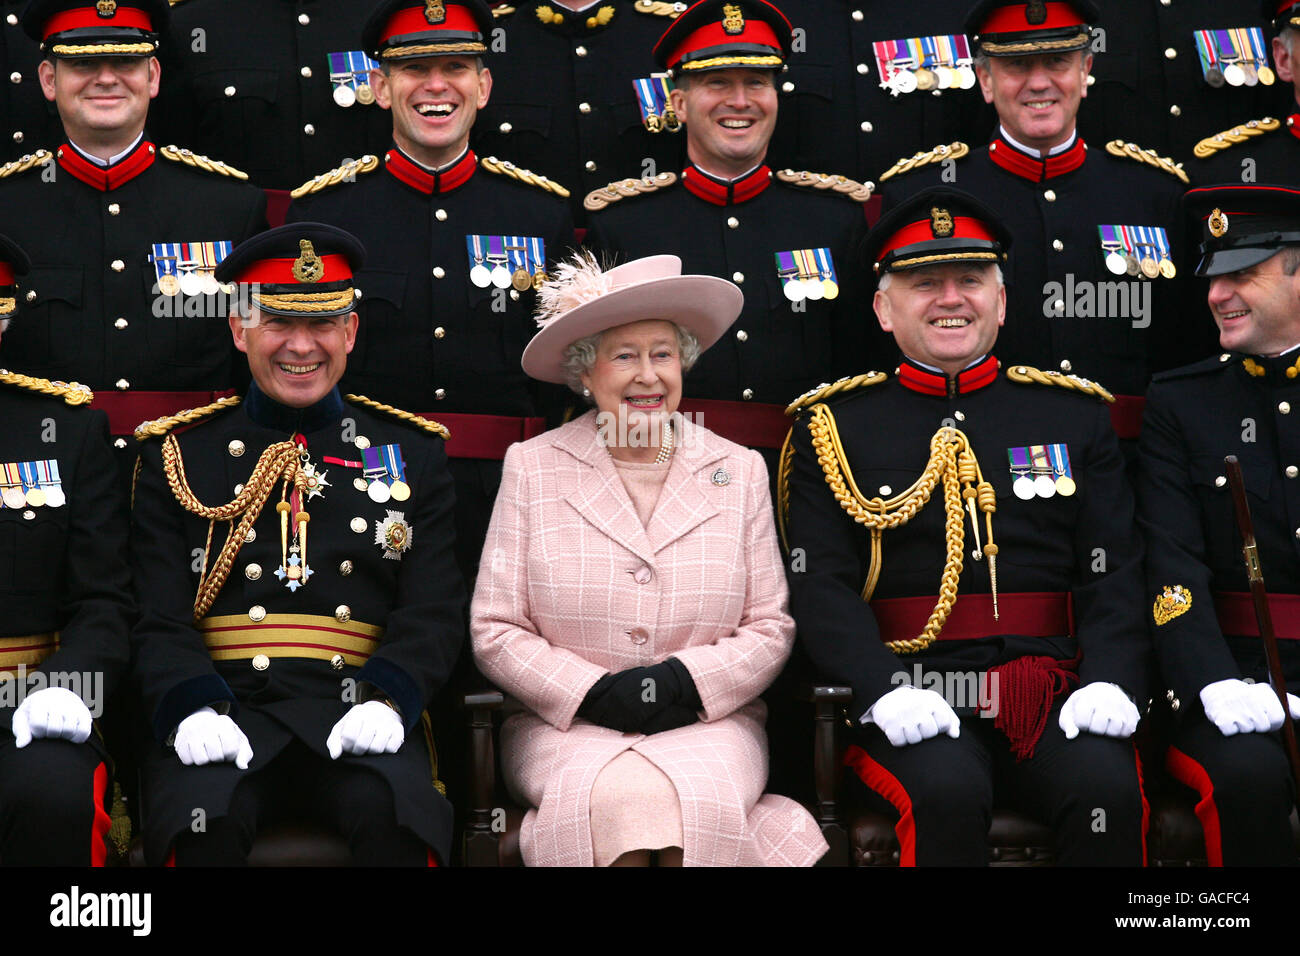 Britain's Queen Elizabeth II poses for a photograph, accompanied by Chief Royal Engineer Sir Kevin O'Donoghue (Left) and Brigadier Chris Sexton (Right) during a visit to the Corps of Royal Engineers at Brompton Barracks, Chatham, Kent. Stock Photo